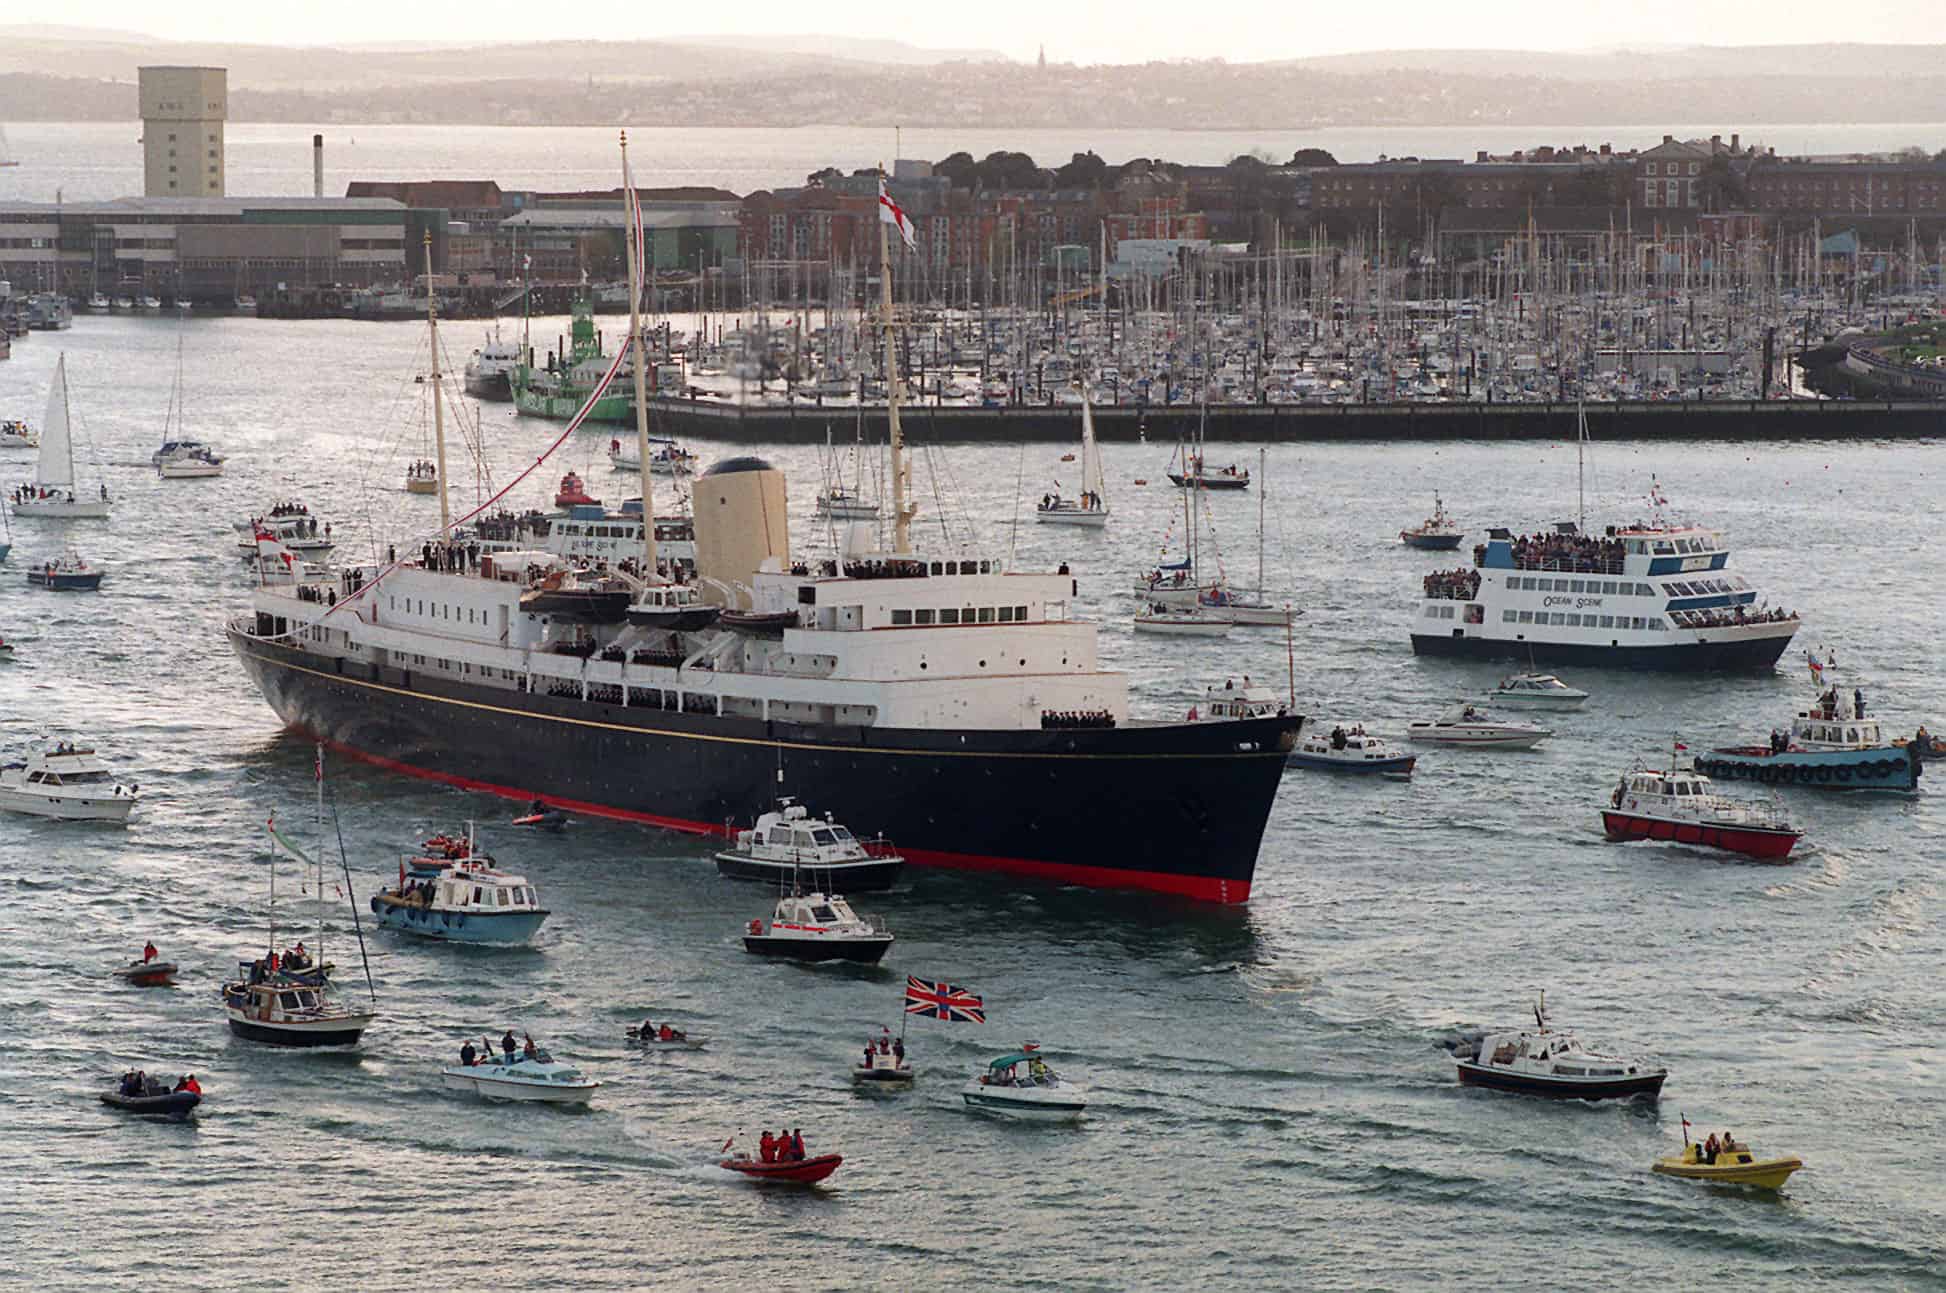 Lord Digby Jones joins calls for £100 million Royal Yacht Britannia- saying it will provide ‘morale boost’